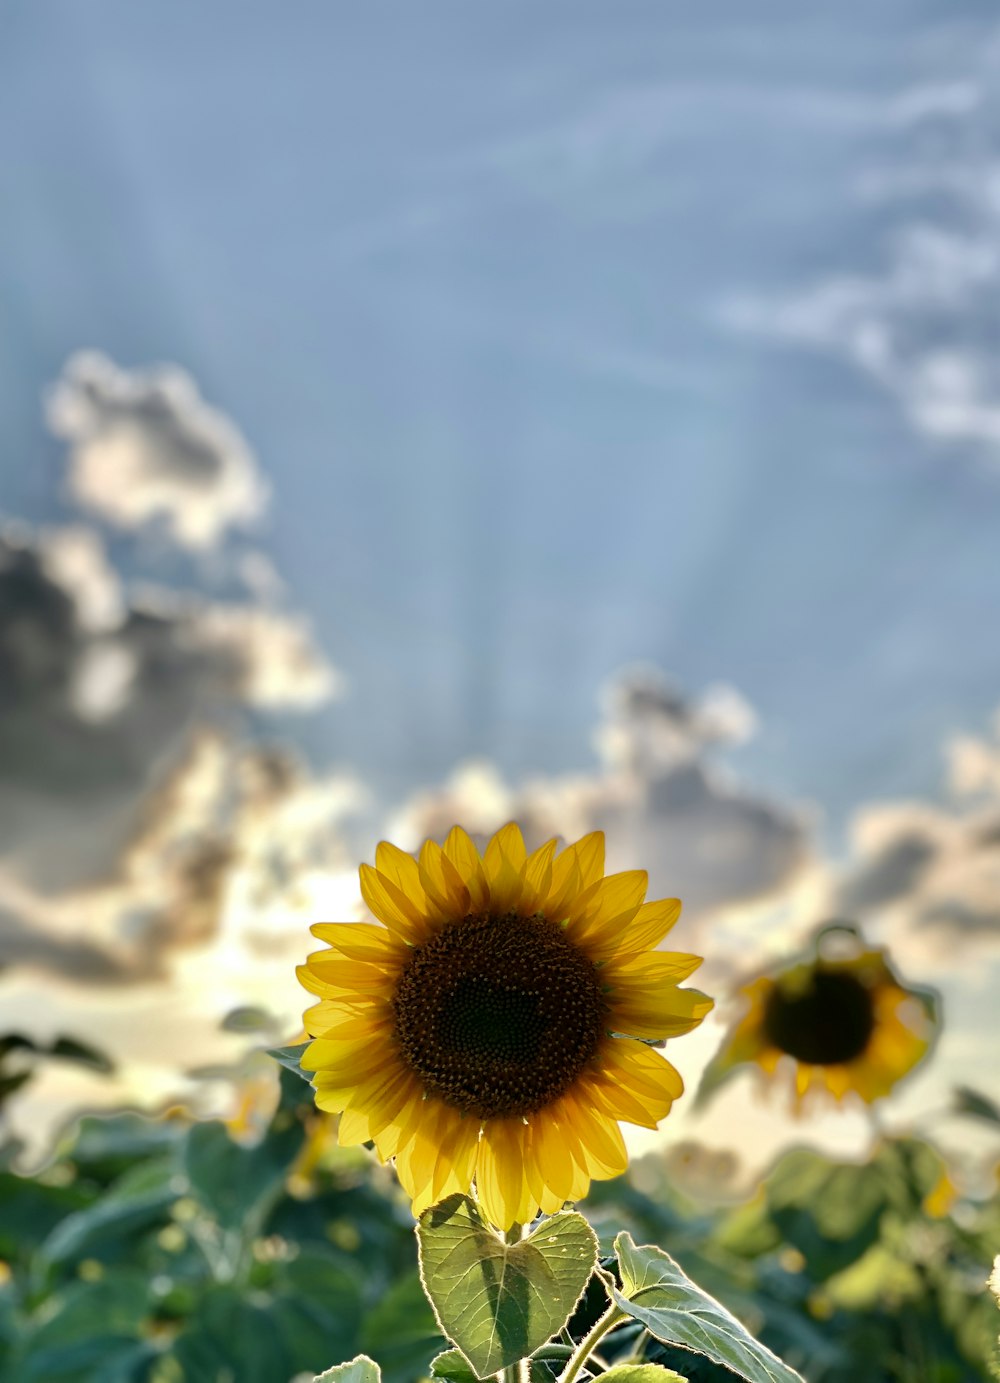 sunflower under white clouds and blue sky during daytime